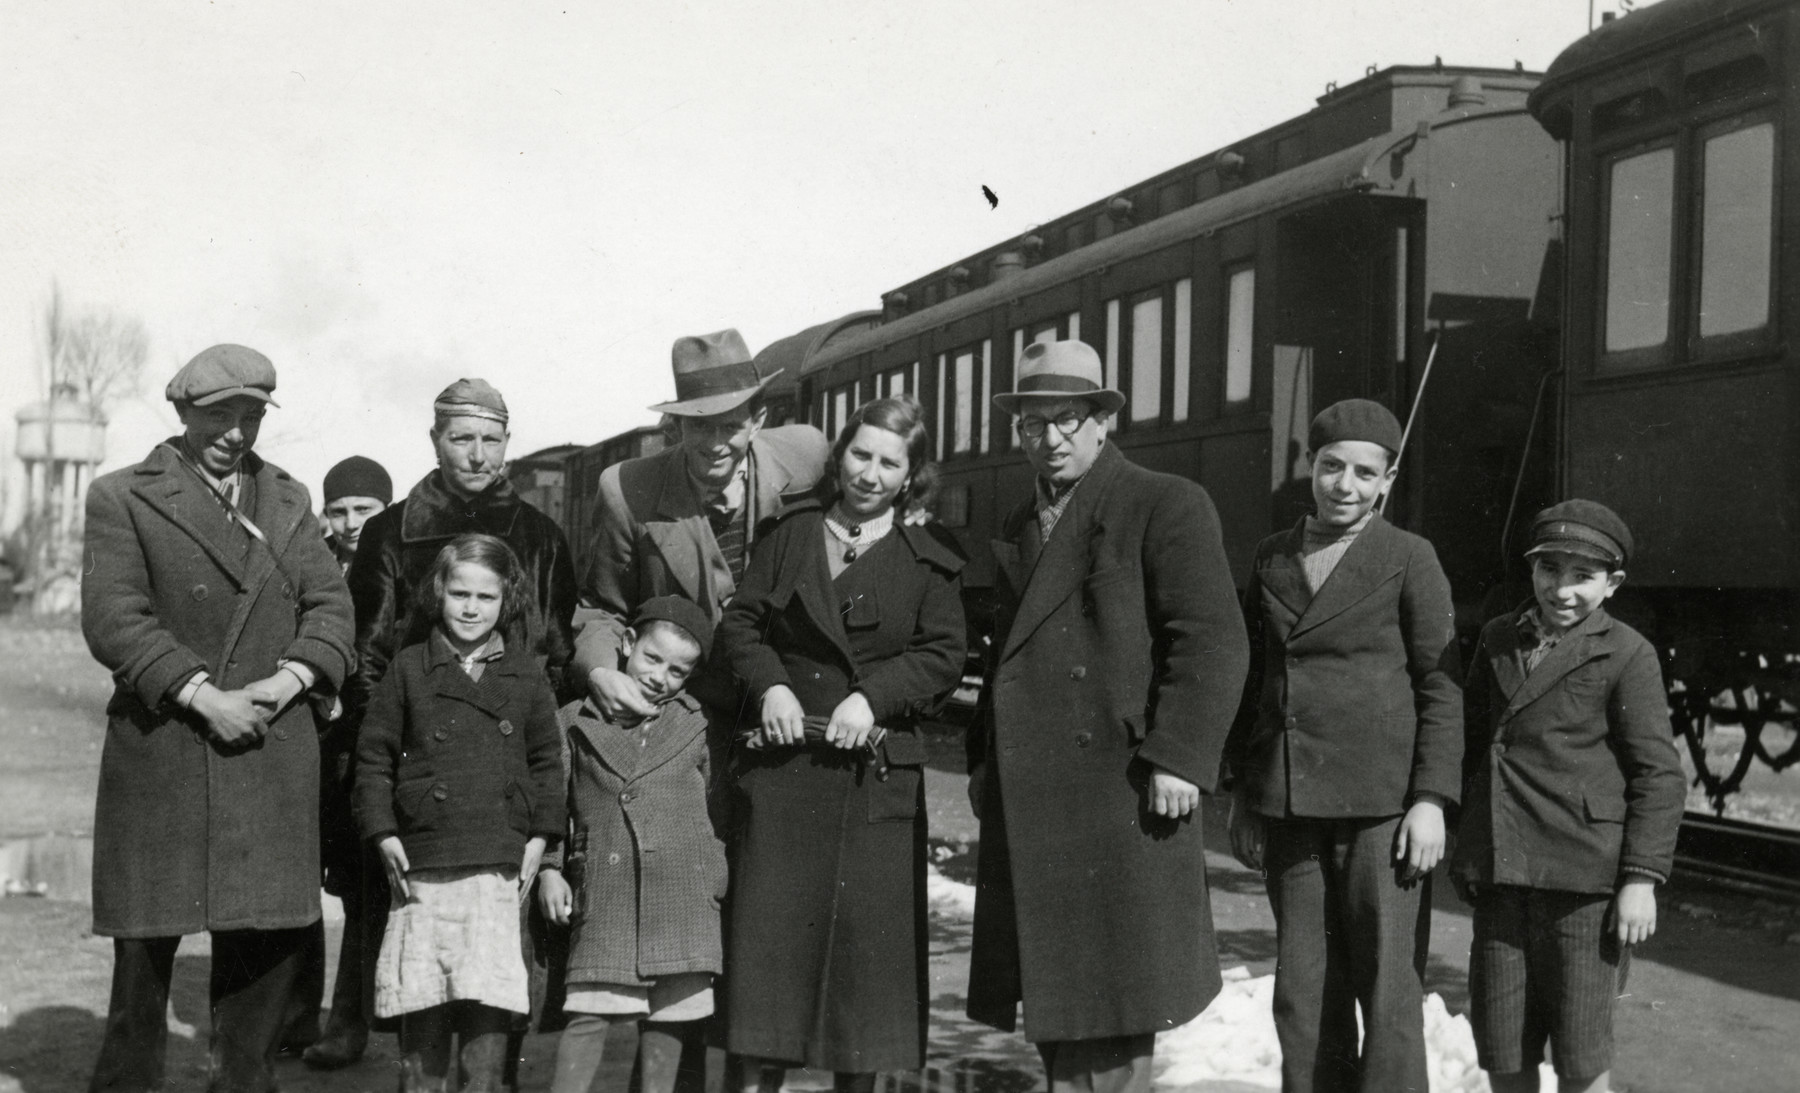 Rabbi Moise Cassorla (father of the donor) poses with his family in front of a train. 

Rabbi Cassorla stands third from the right. His mother stands third from the left.